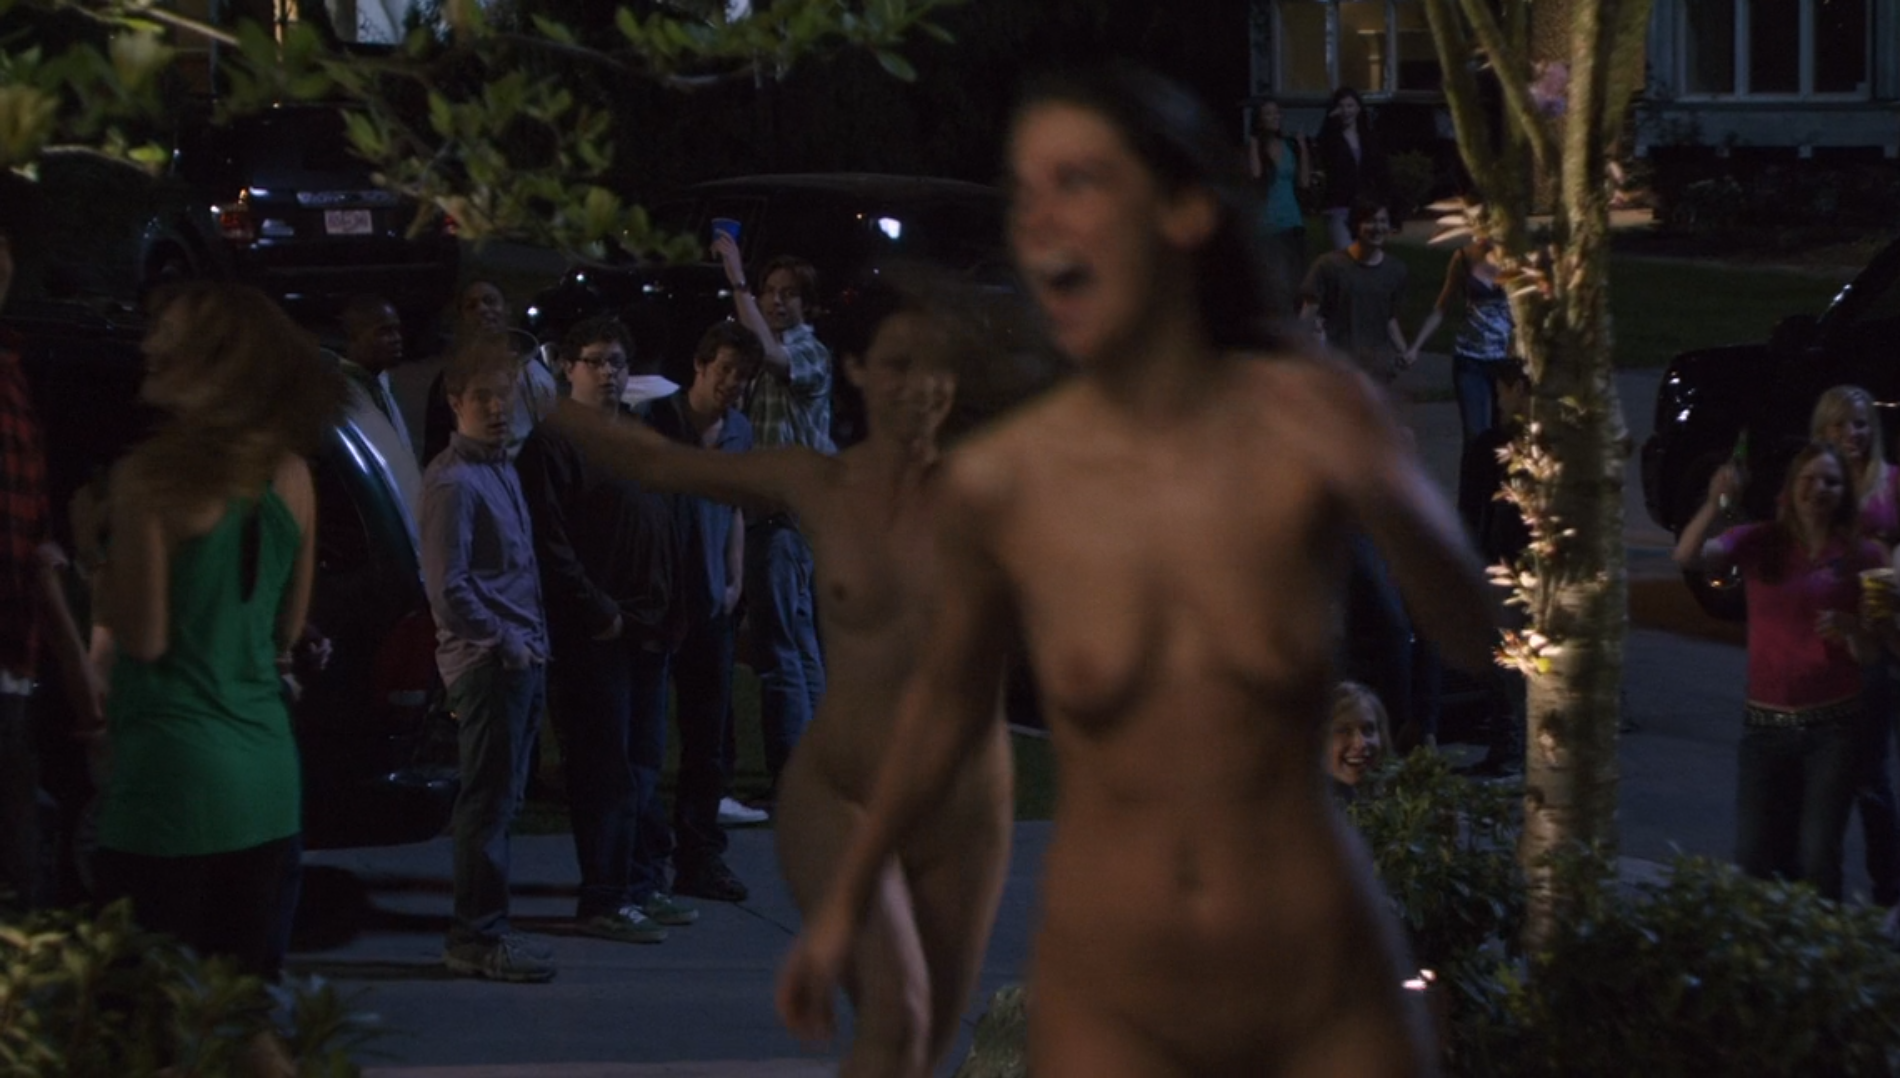 Tits in the movie American Pie: The Book of Love / American Pie Presents: The Book of Love (2009) - NSFW, My, Movies, Boobs, Comedy, 2000s, Longpost, Storyboard